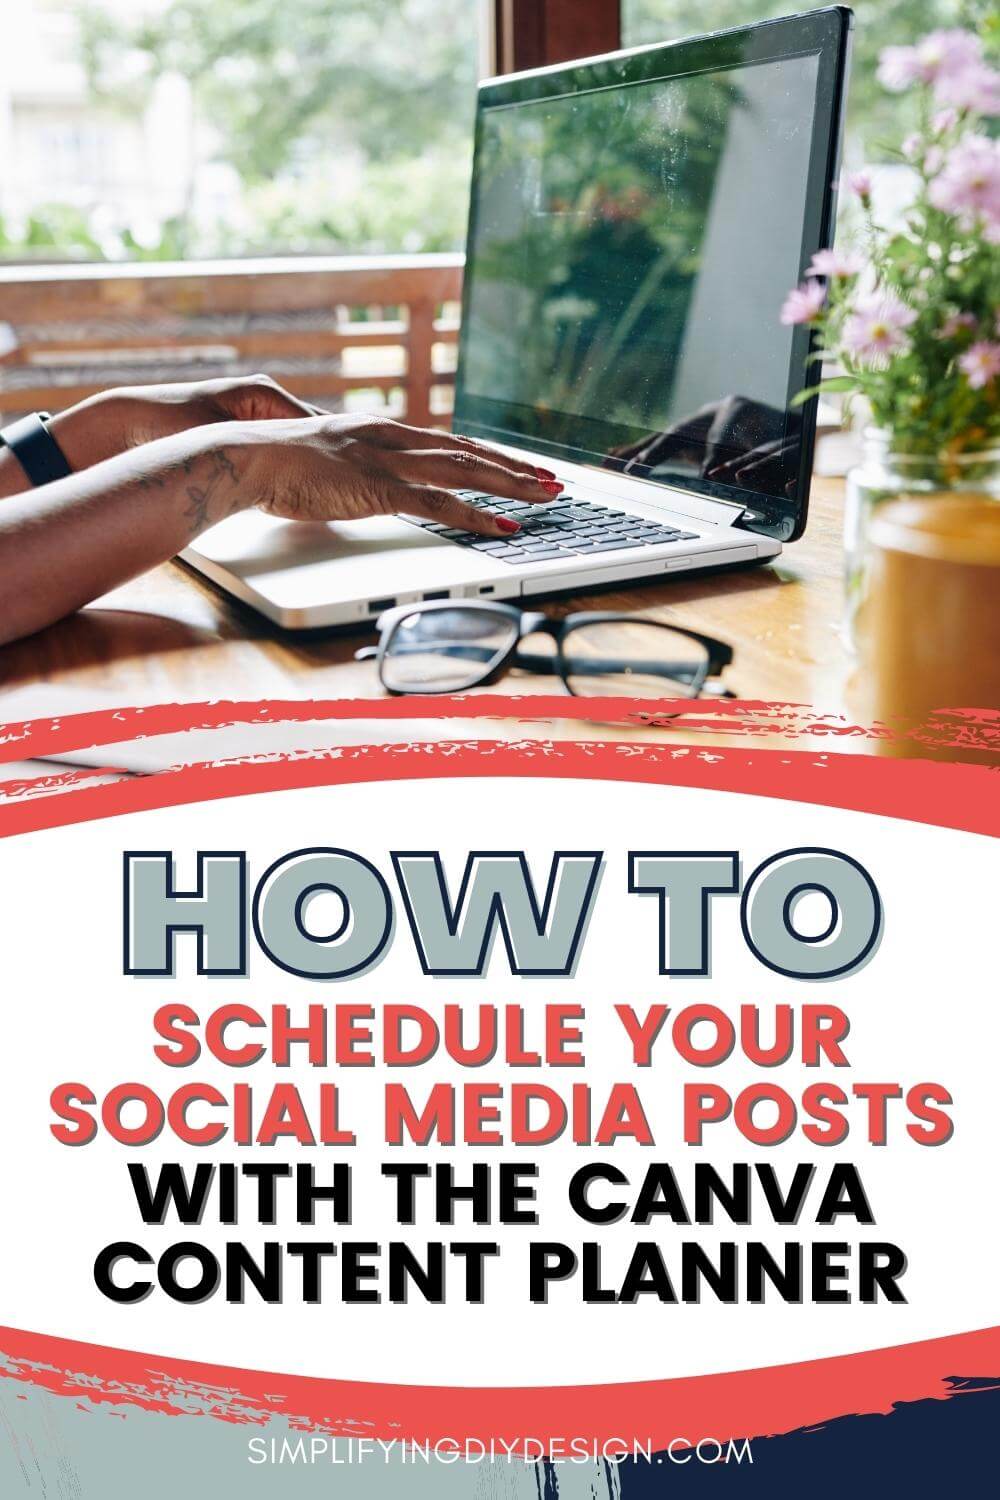 Planning your social media content is now easier than ever with the Canva Content Planner! Plan, schedule, and post as you design right inside of Canva.